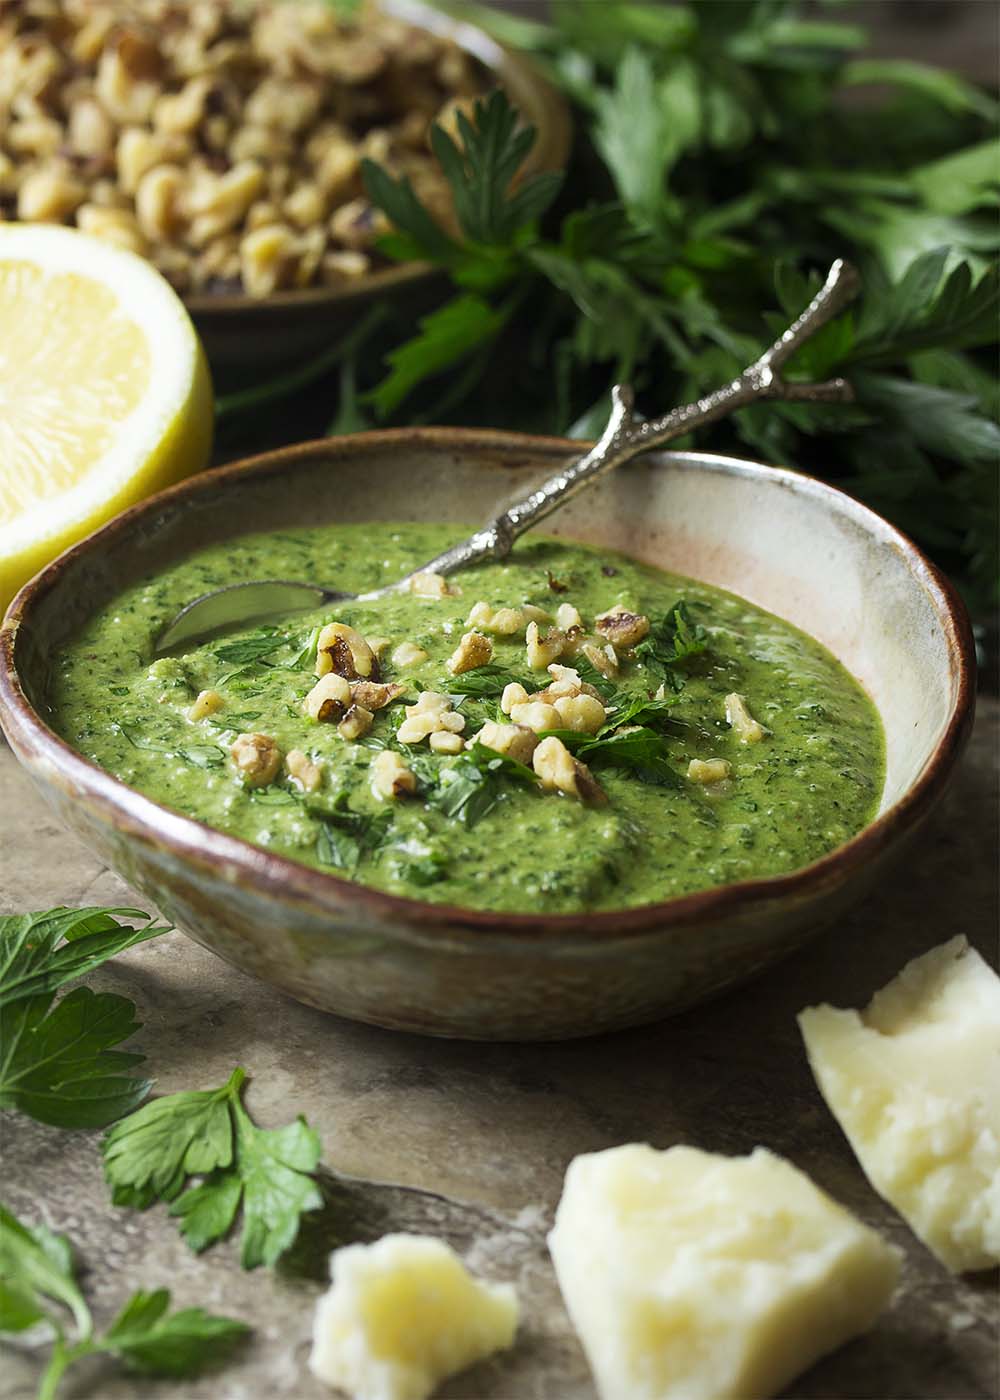 A small bowl of Italian parsley pesto topped with chopped walnuts and parsley. Parmesan cheese, parsley, and walnuts arranged around the bowl.